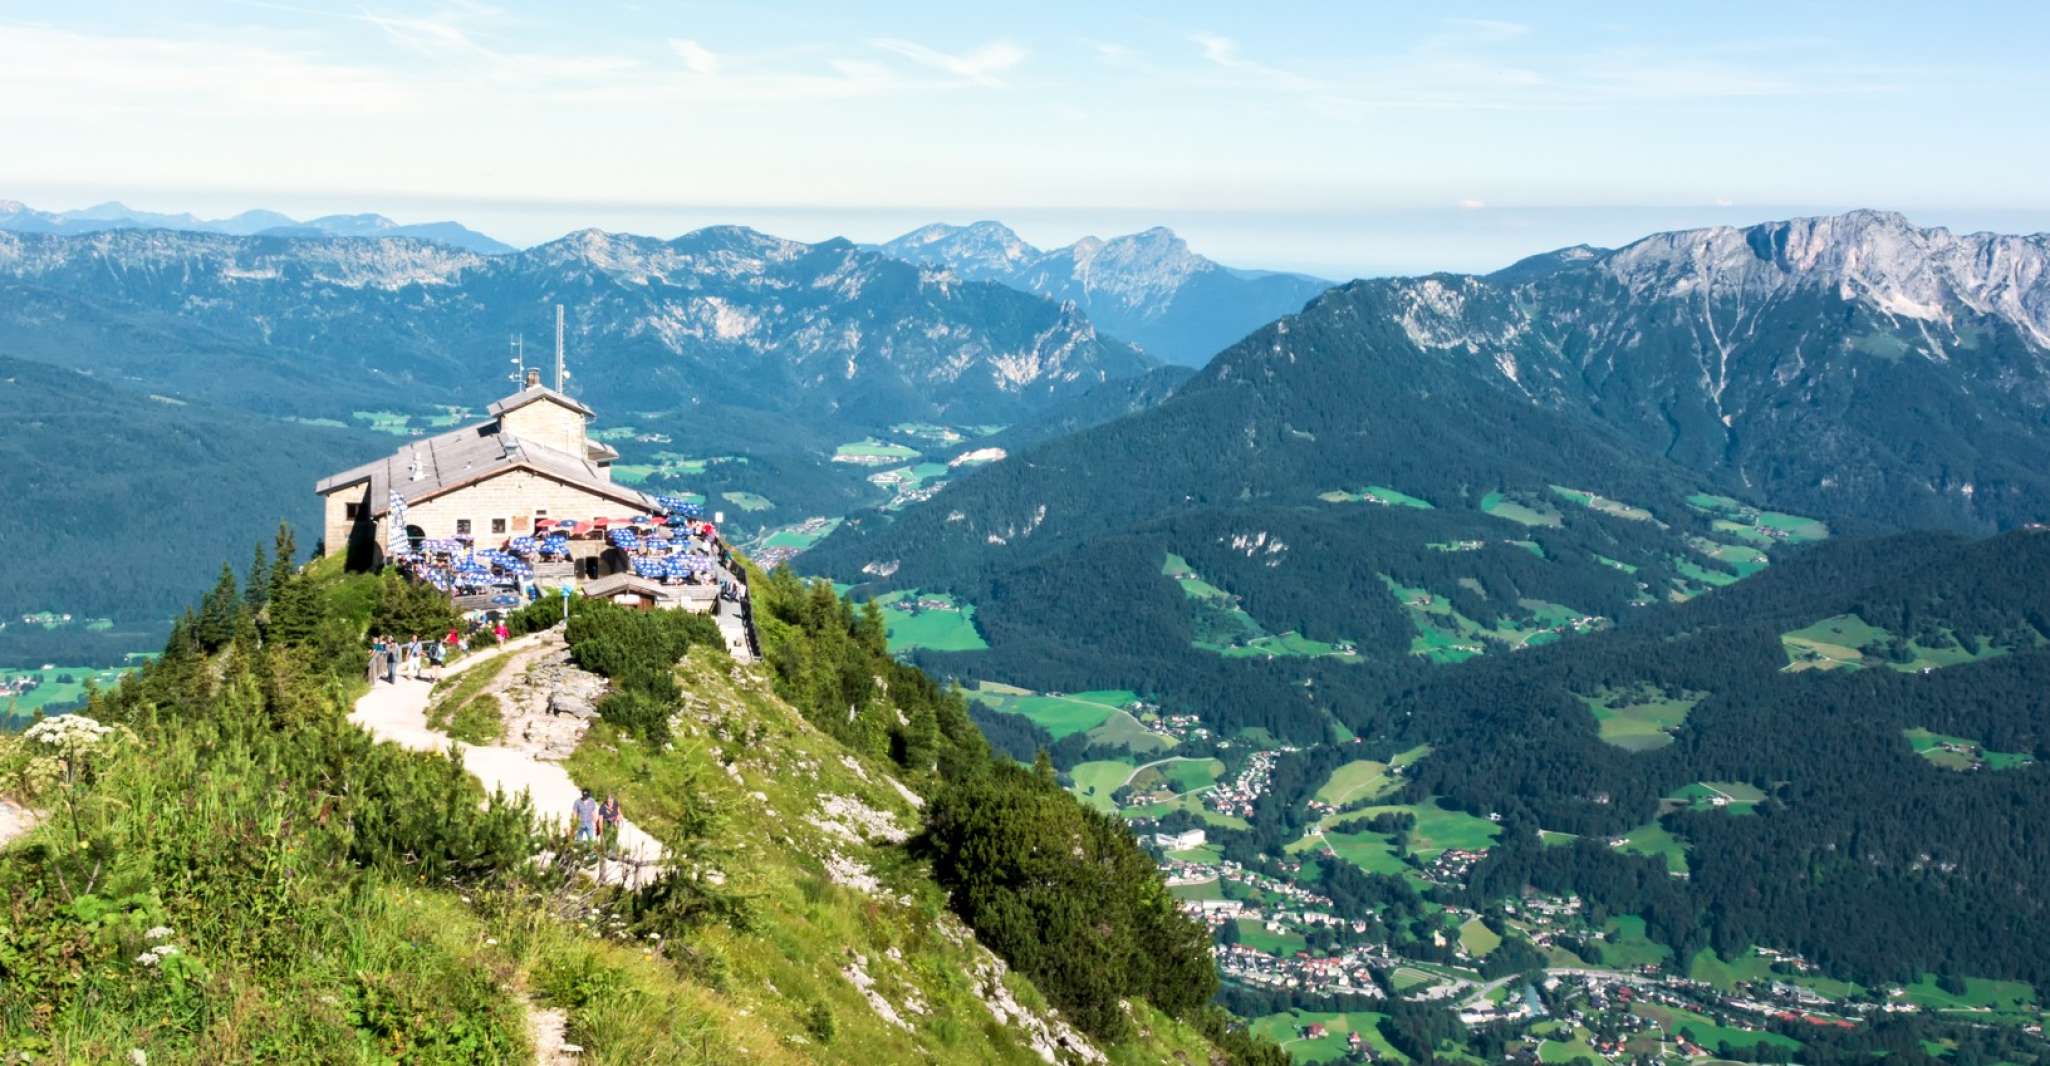 From Munich, Guided Group Tour to Eagle’s Nest - Housity